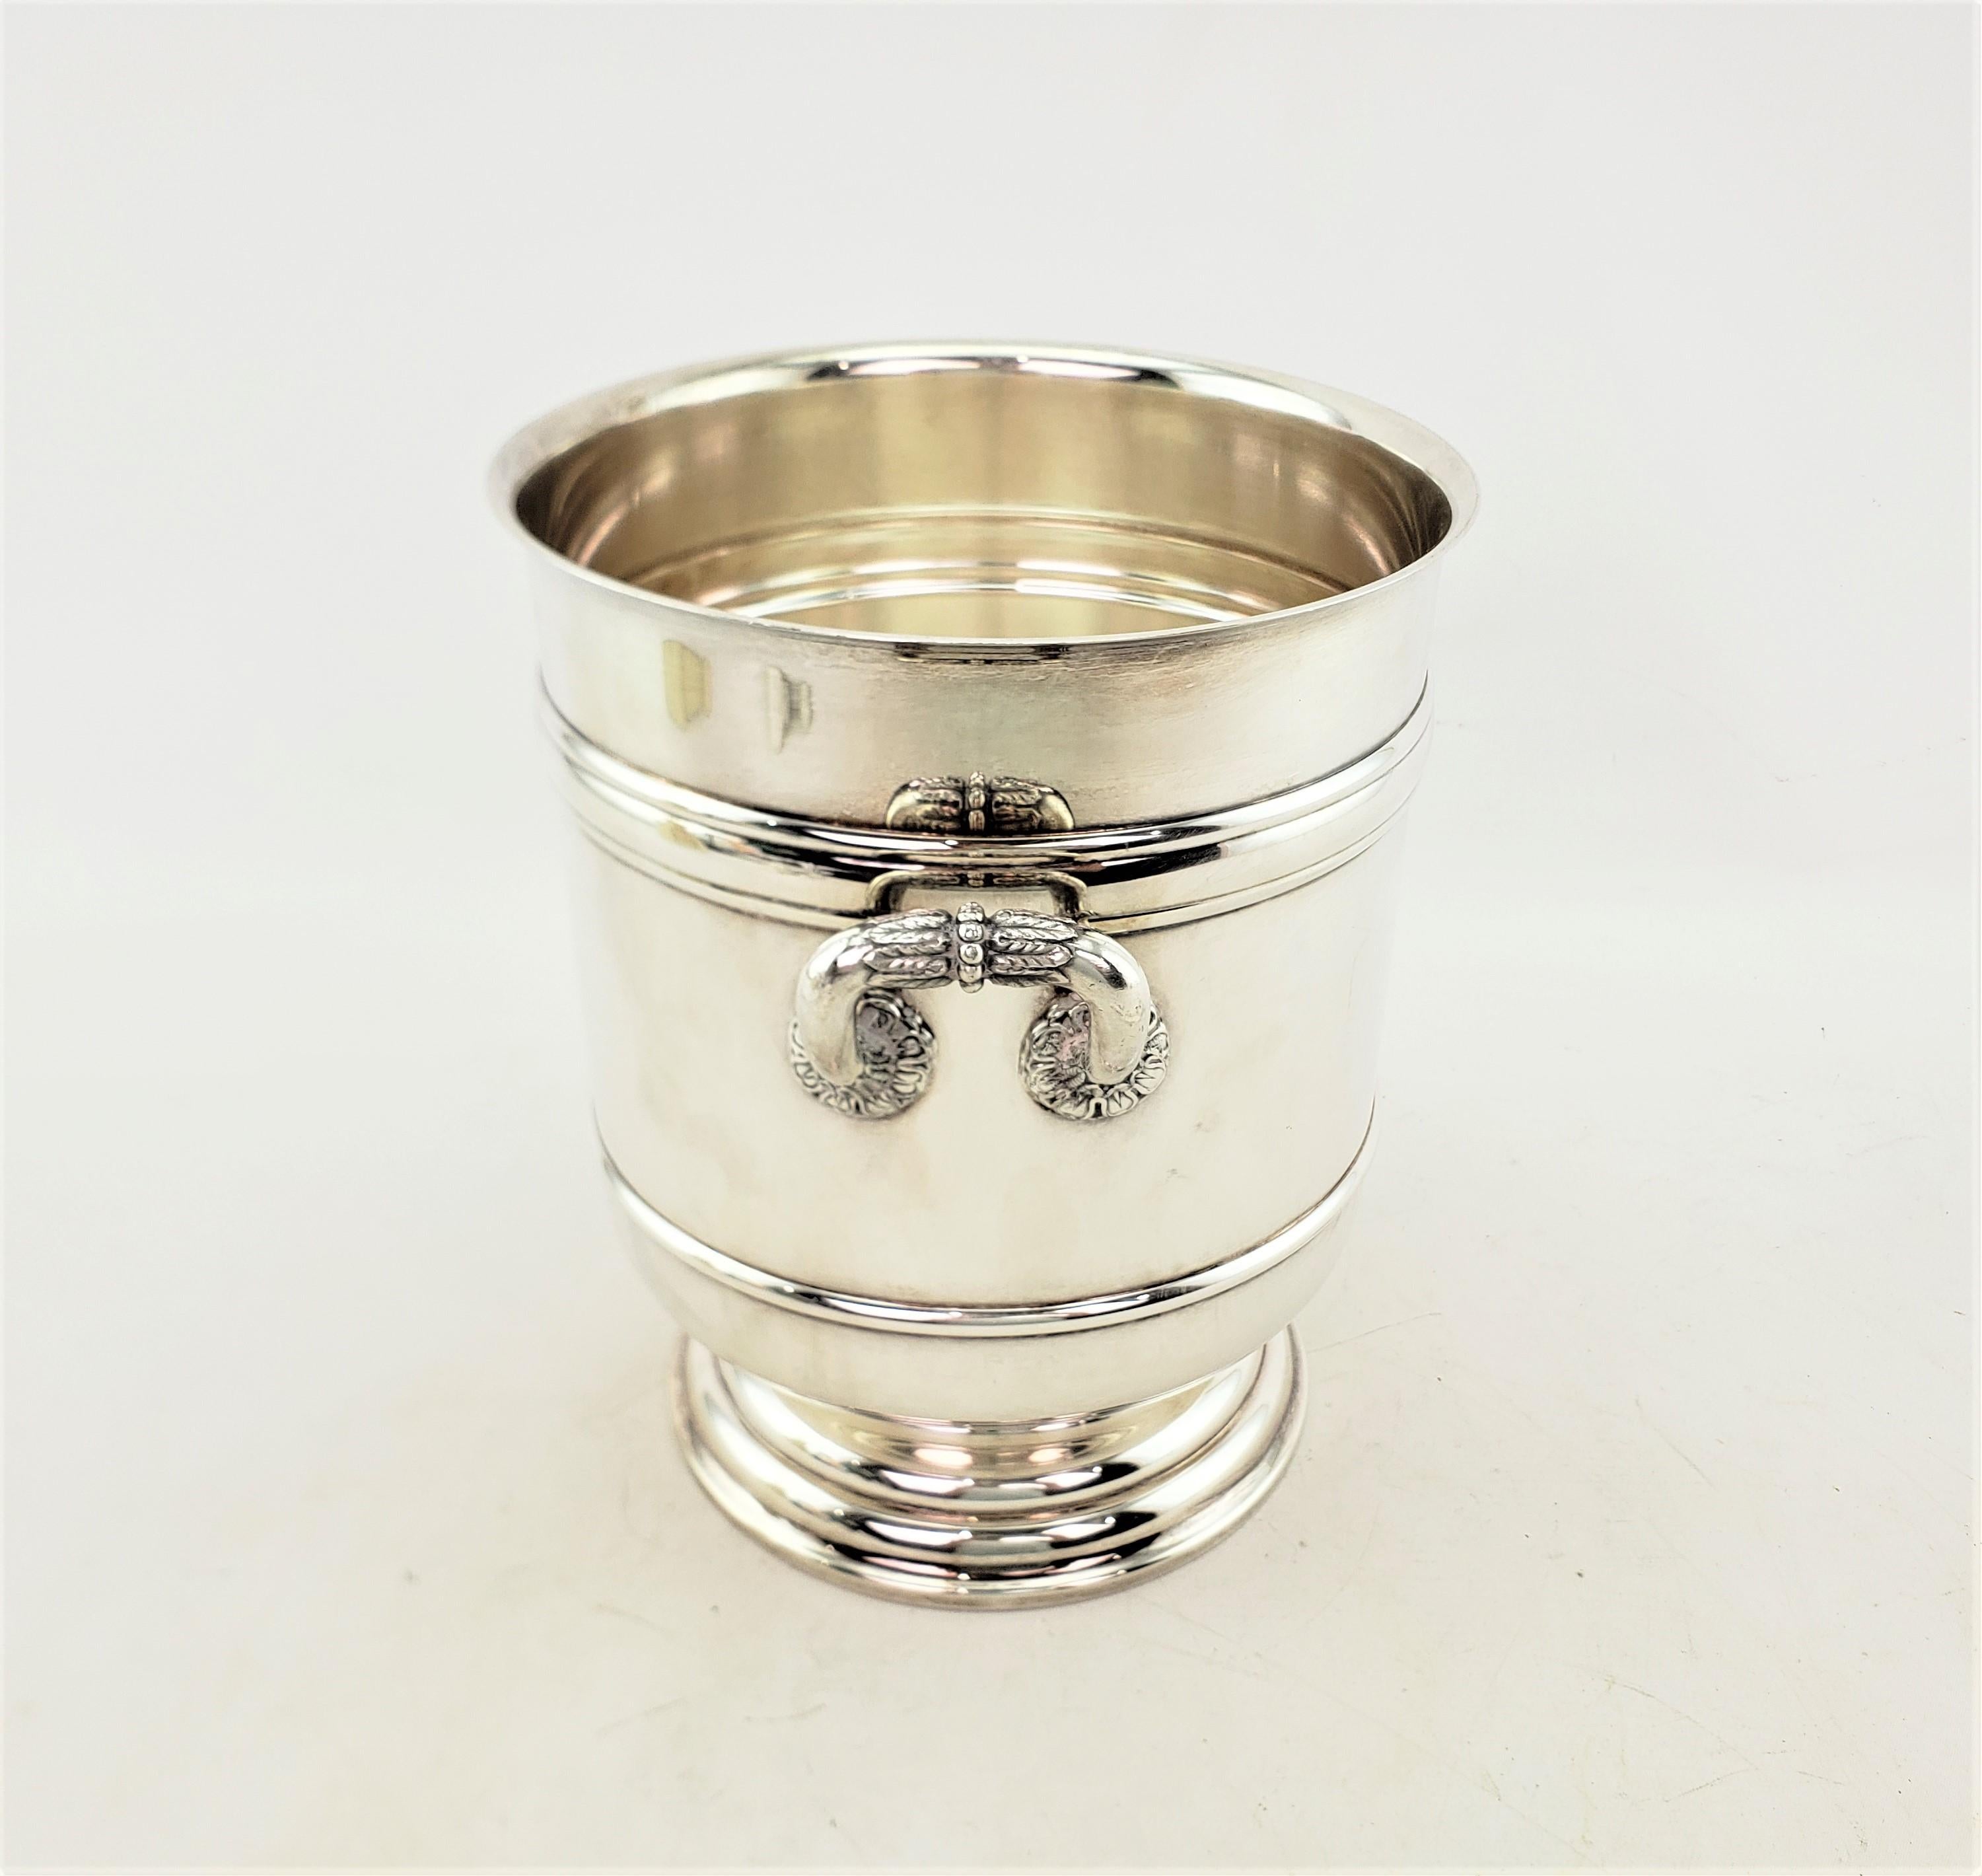 20th Century Mid-Century Era Christofle Silver Plated Ice Bucket or Bottle Chiller For Sale